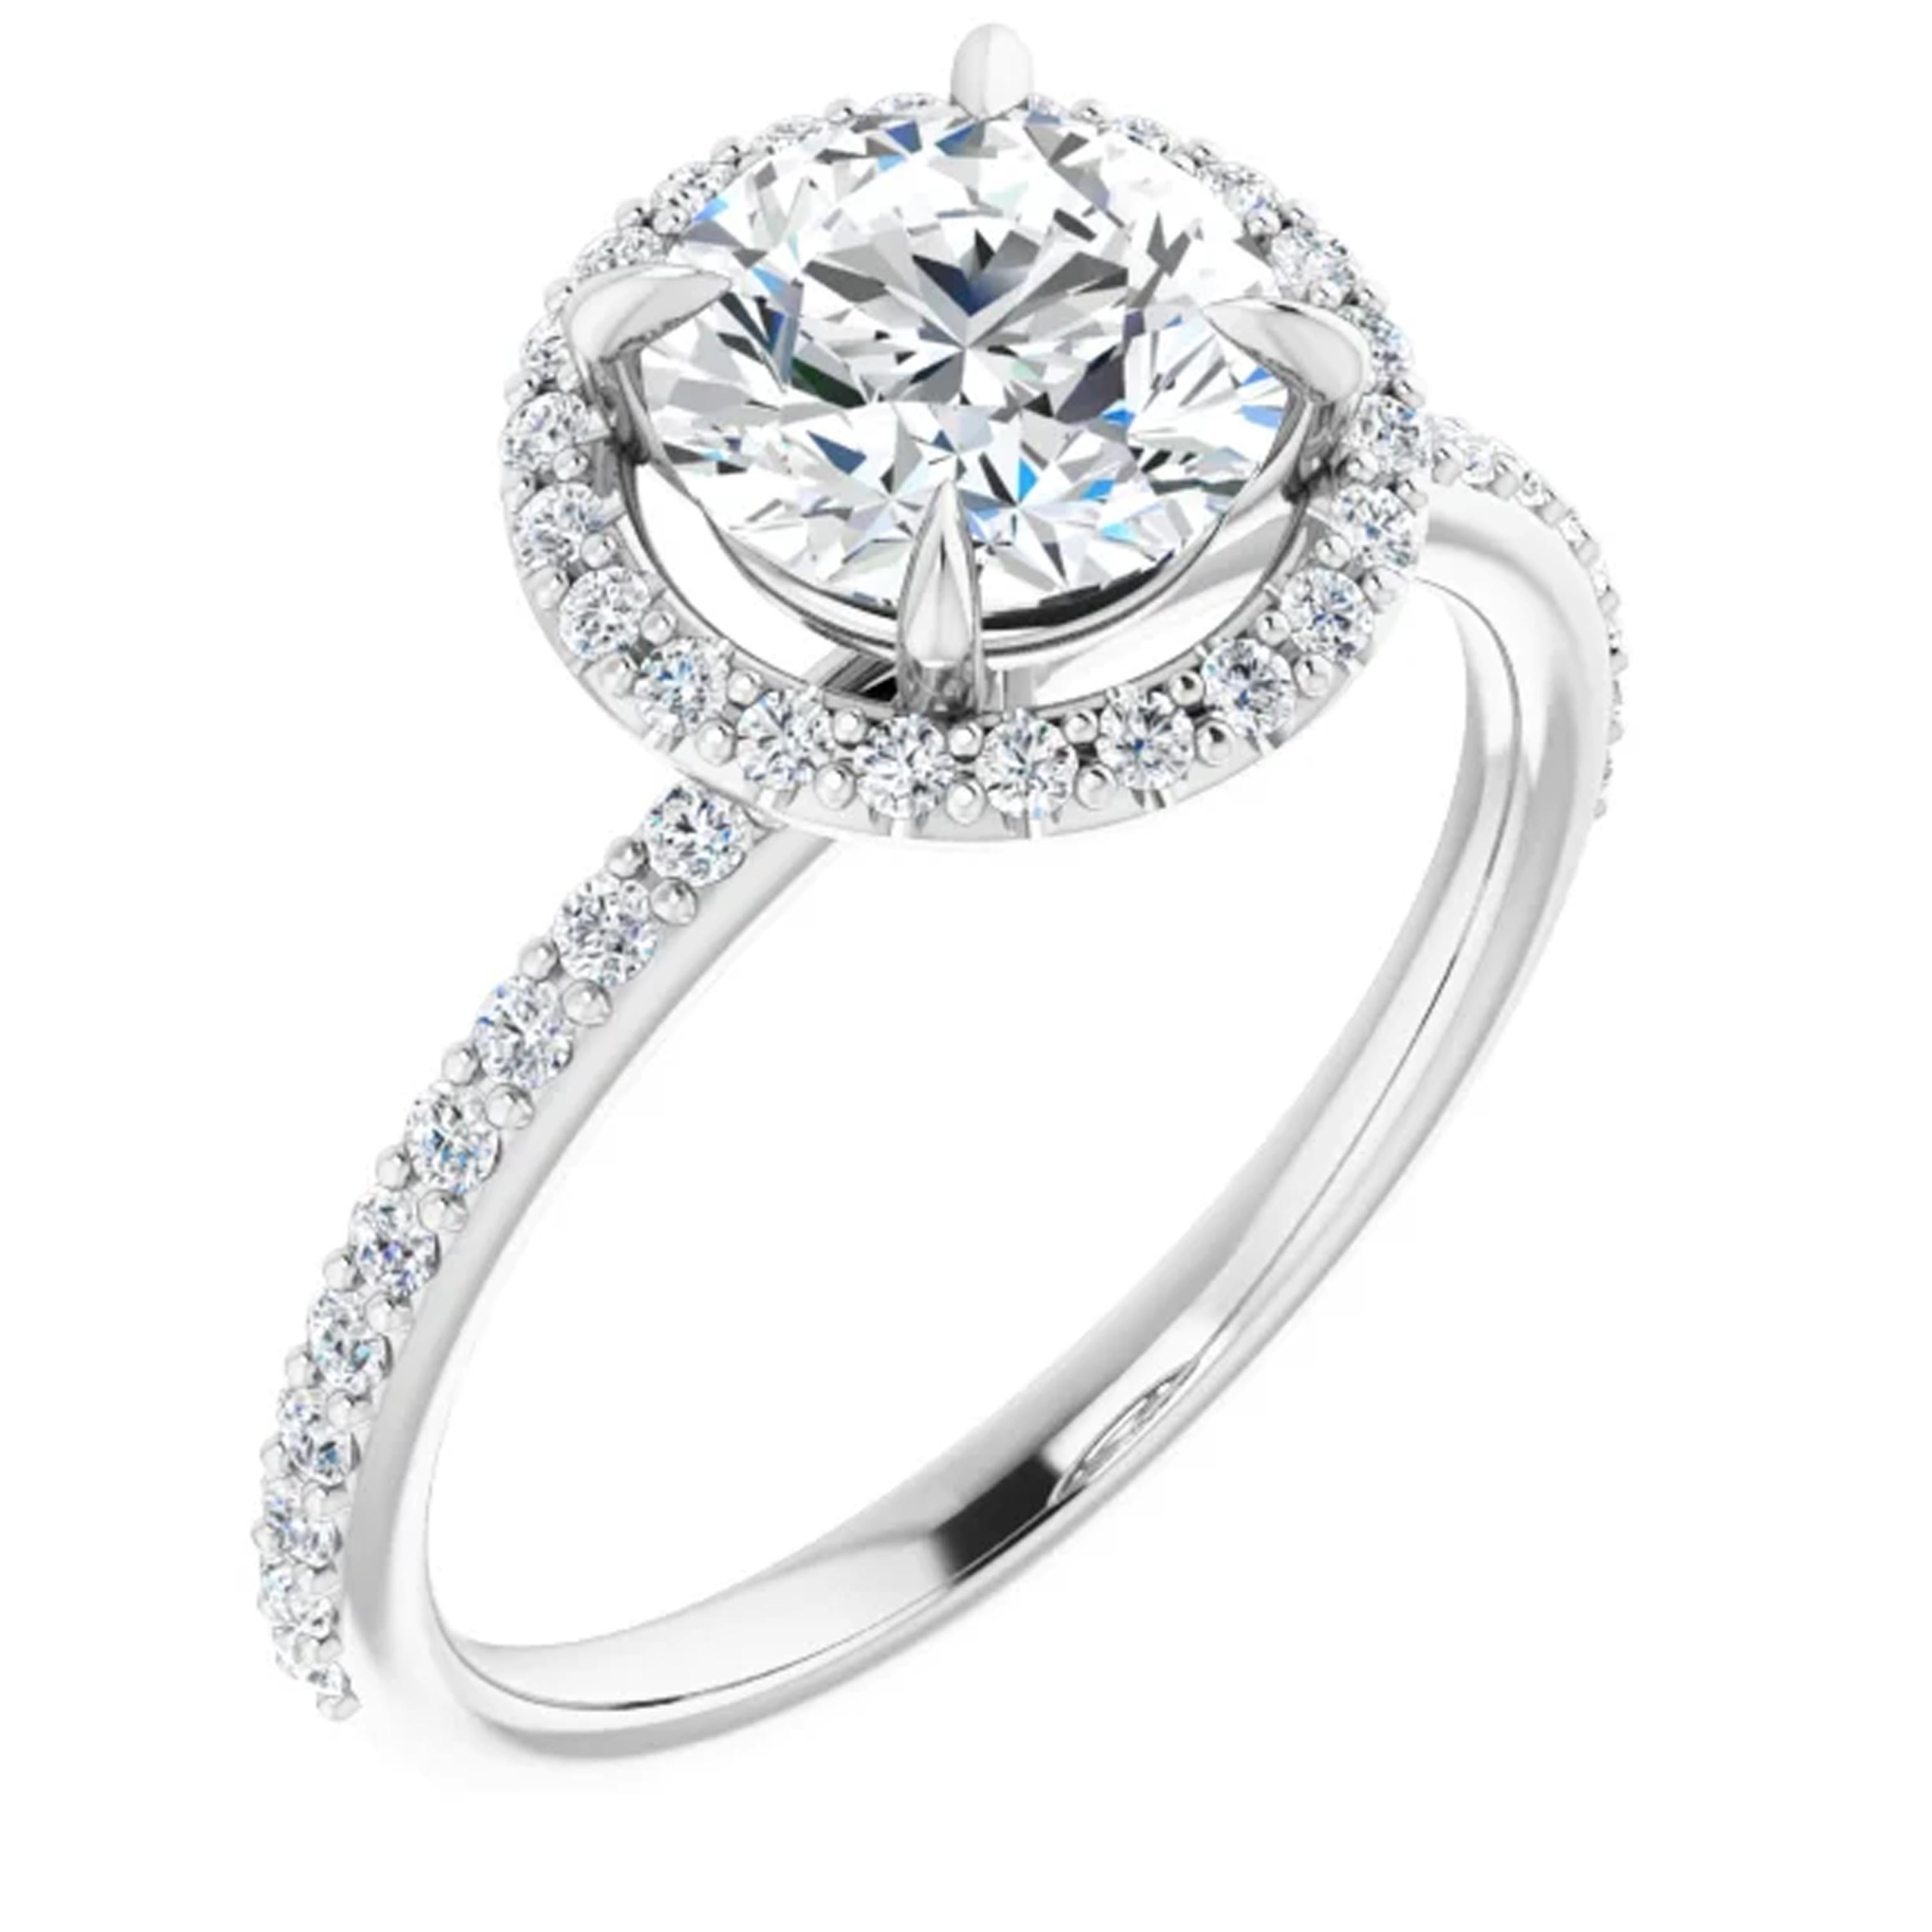 Petite yet chic, this adorable engagement ring is surrounded by a halo of shimmering white diamonds encircling the GIA certified center diamond. Additional diamonds line the 14k white gold accented shank. Seal the unique feeling you have, commit for